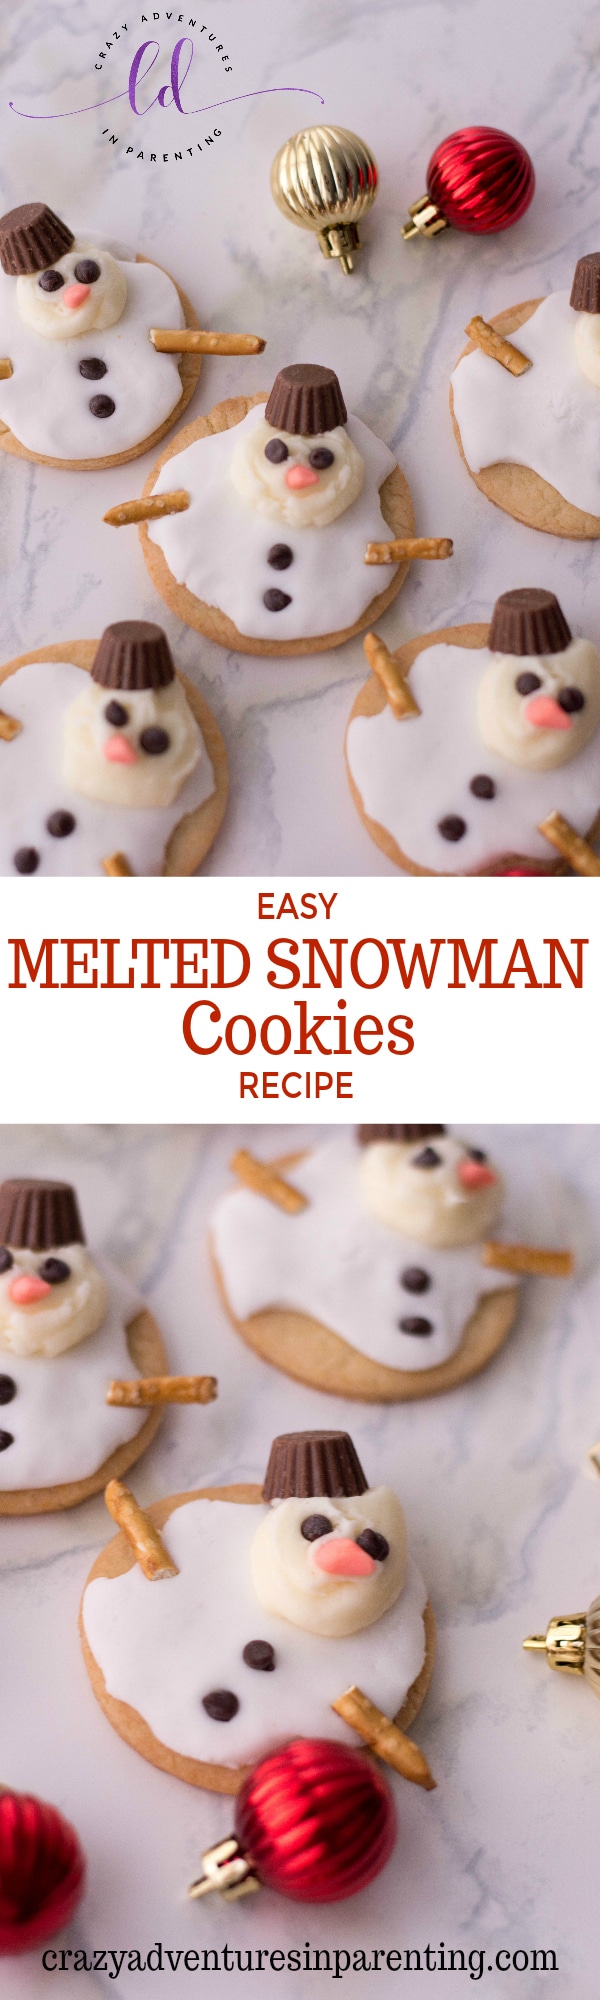 Easy Melted Snowman Cookies Recipe